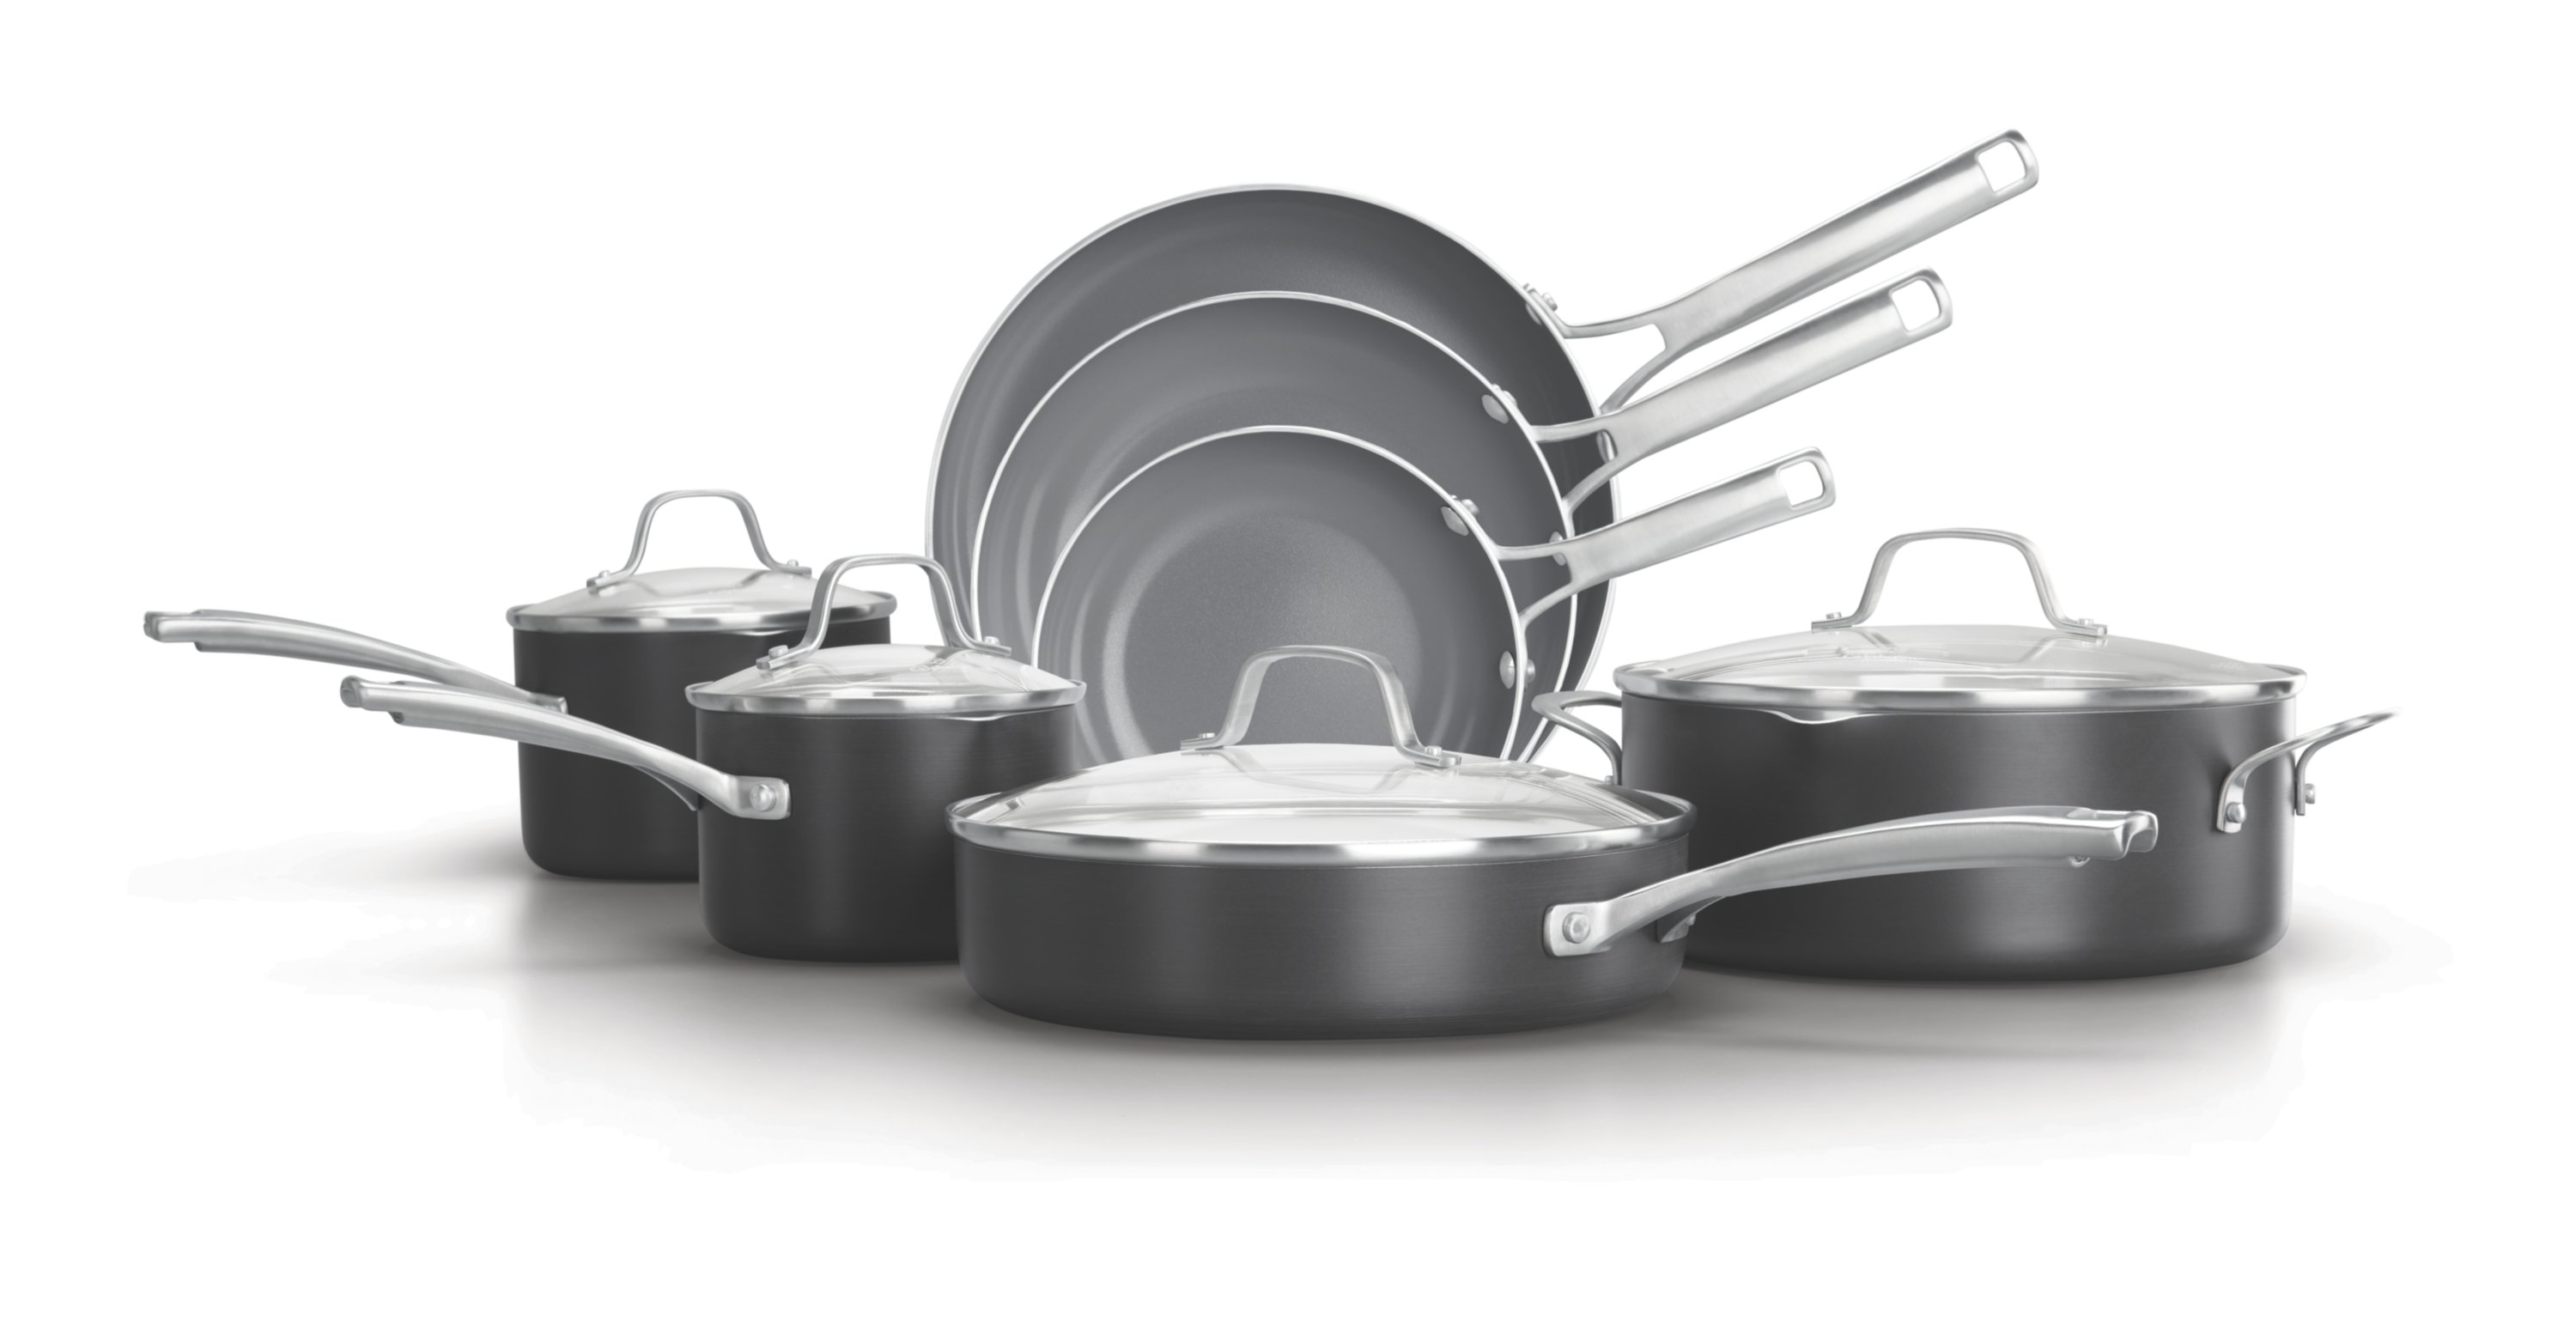 https://newellbrands.scene7.com/is/image//NewellRubbermaid/2064709-calphalon-cookware-classic-11pc-set-no-food-group-straight-on